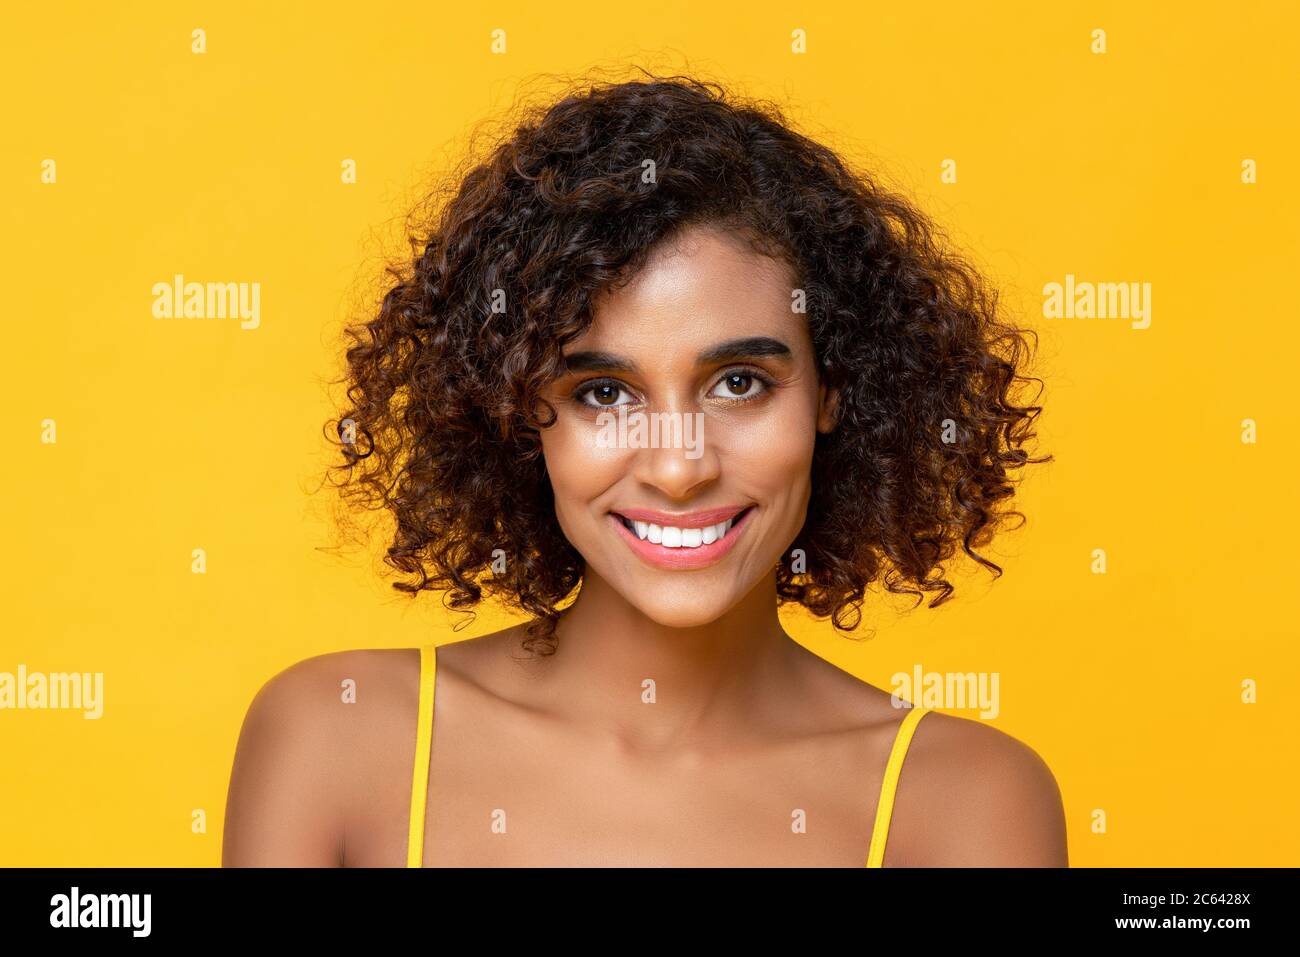 Happy smiling curly hair beautiful woman looking at camera isolated on  yellow background Stock Photo - Alamy